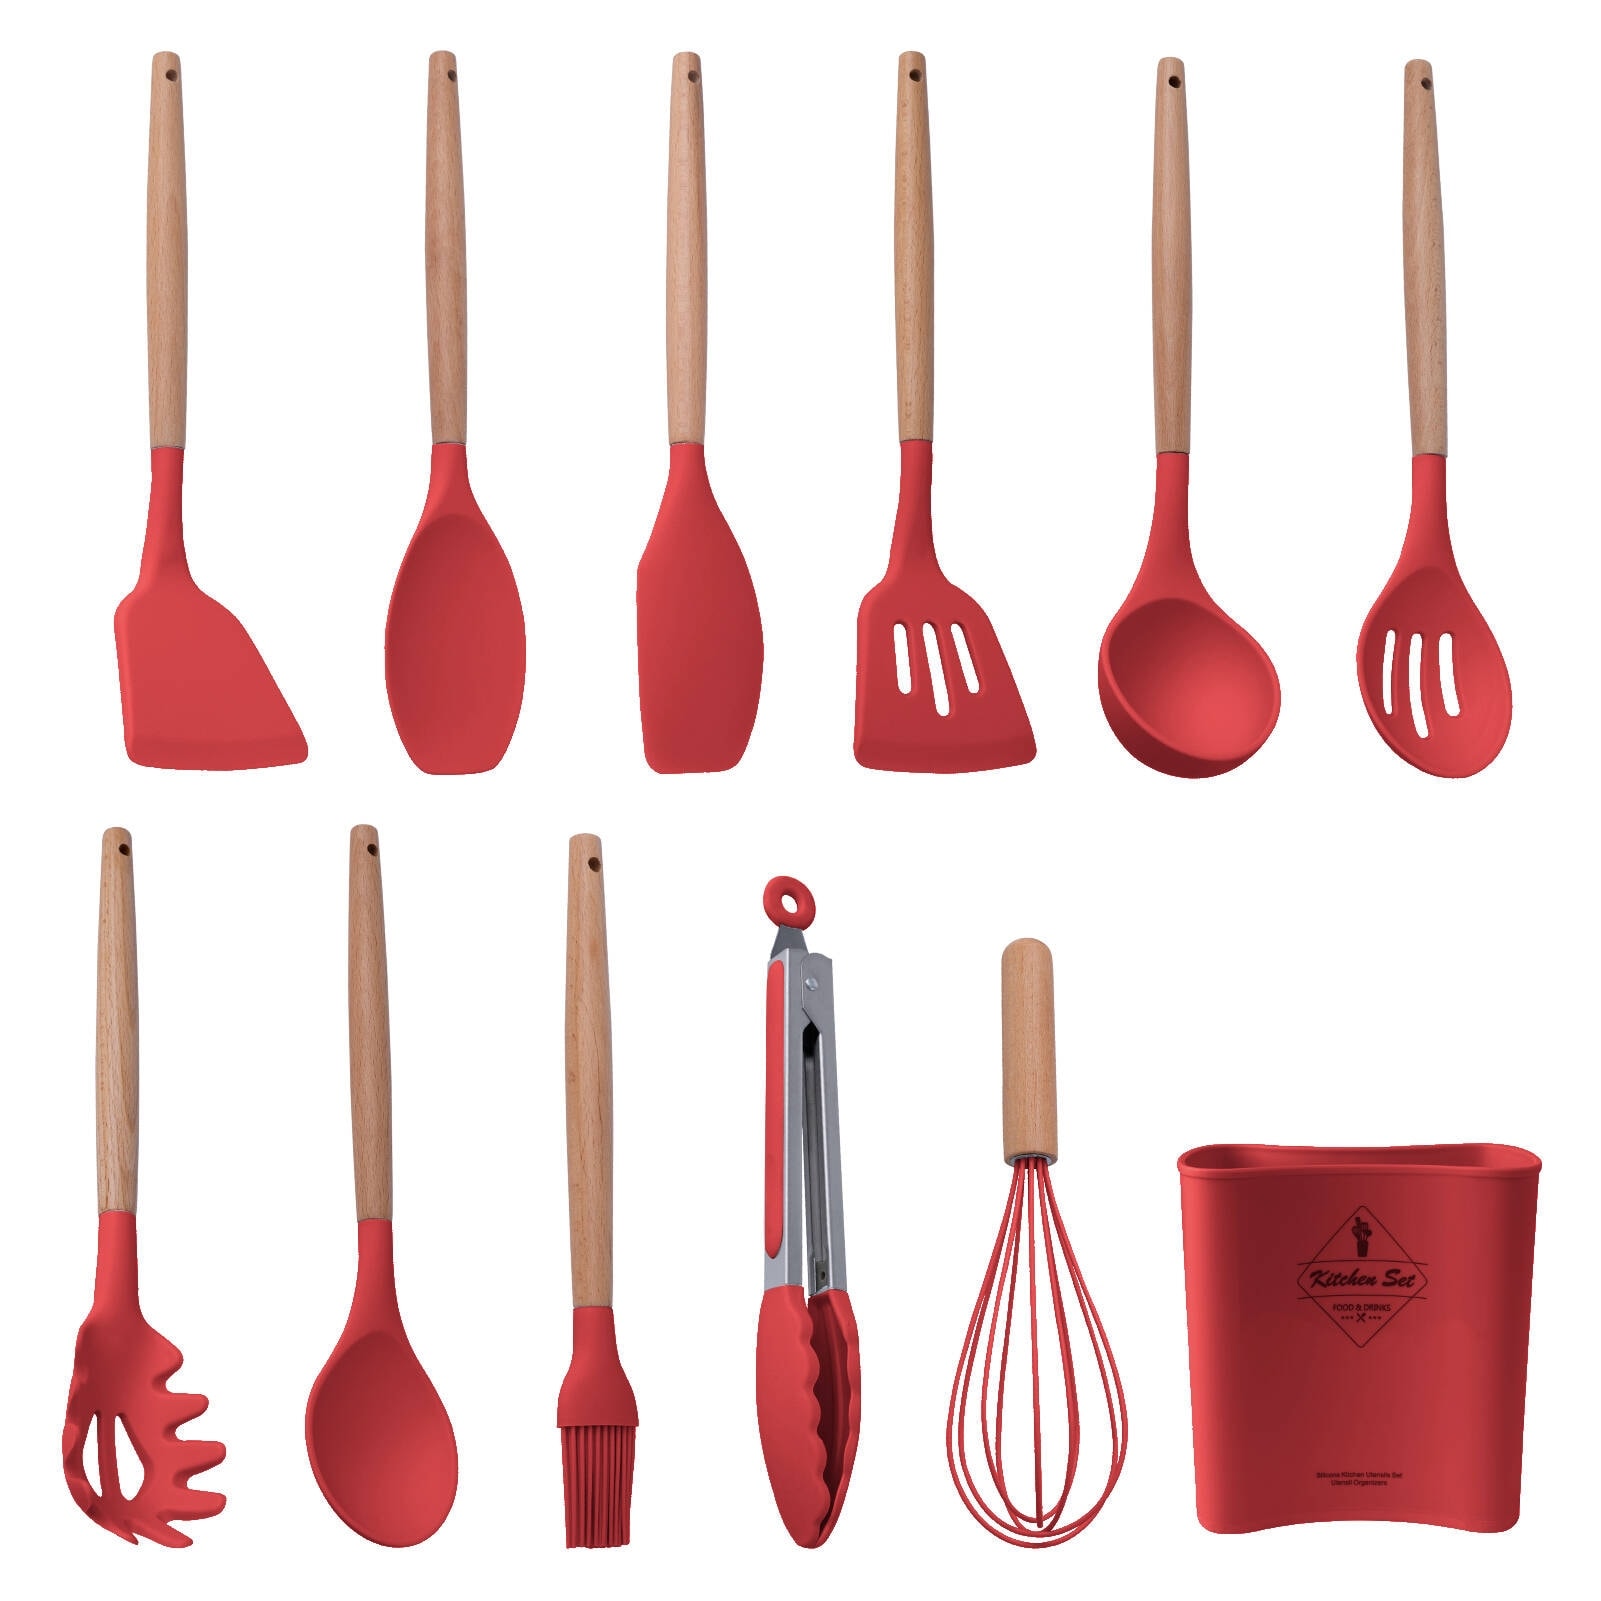 https://ak1.ostkcdn.com/images/products/is/images/direct/a88a377a6d0194d9834c062b6e4d20e5842c2314/12-Piece-Silicone-Kitchen-Utensils-Set.jpg